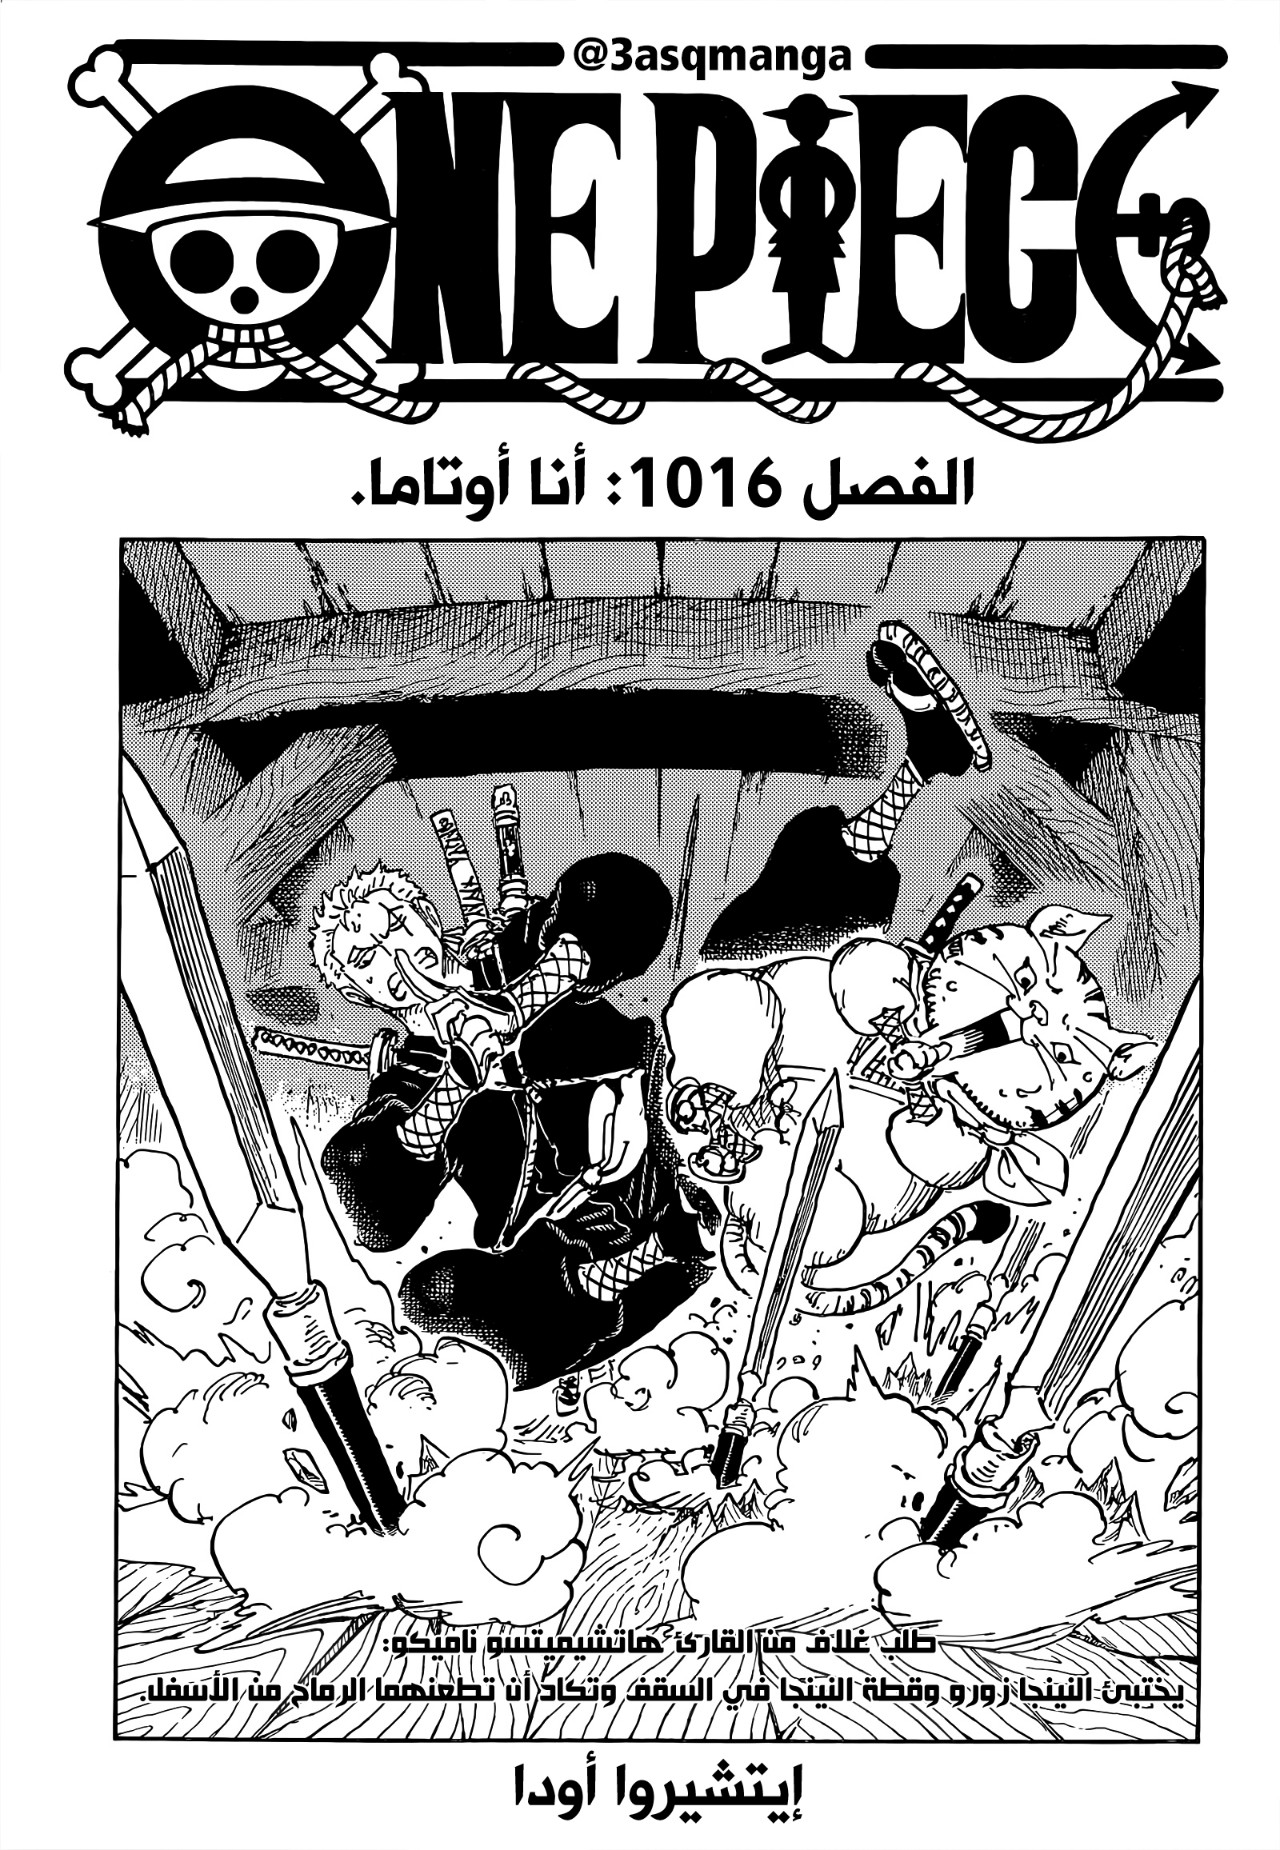 One Piece: Chapter 1016 - Page 1